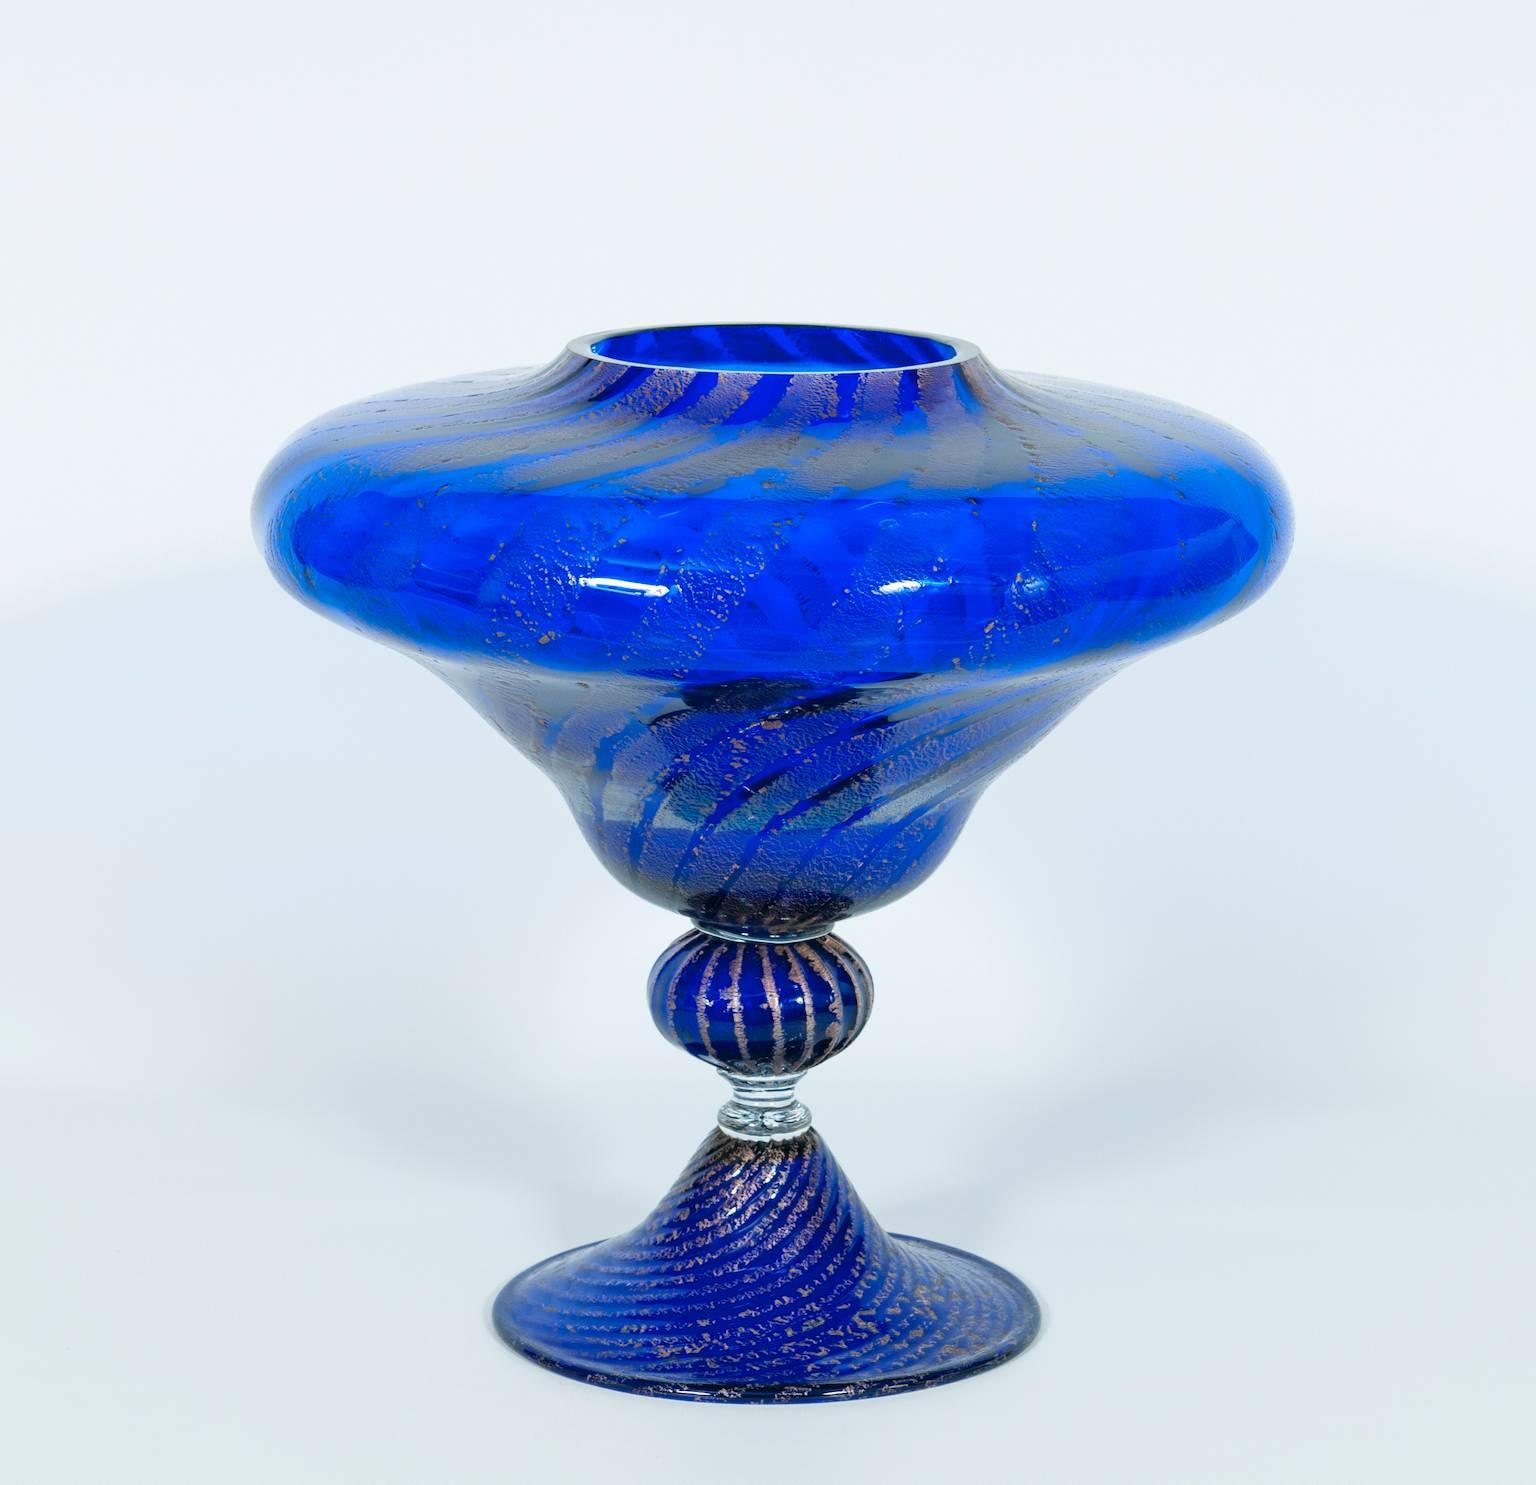 Italian Vase in blown Murano Glass Blue and Silver finishes  1980s.
Italian vase in Murano glass blue and silver, composed by a twisted striped base, in the middle from a striped sphere with above a large twisted striped bowl. This is a masterpiece